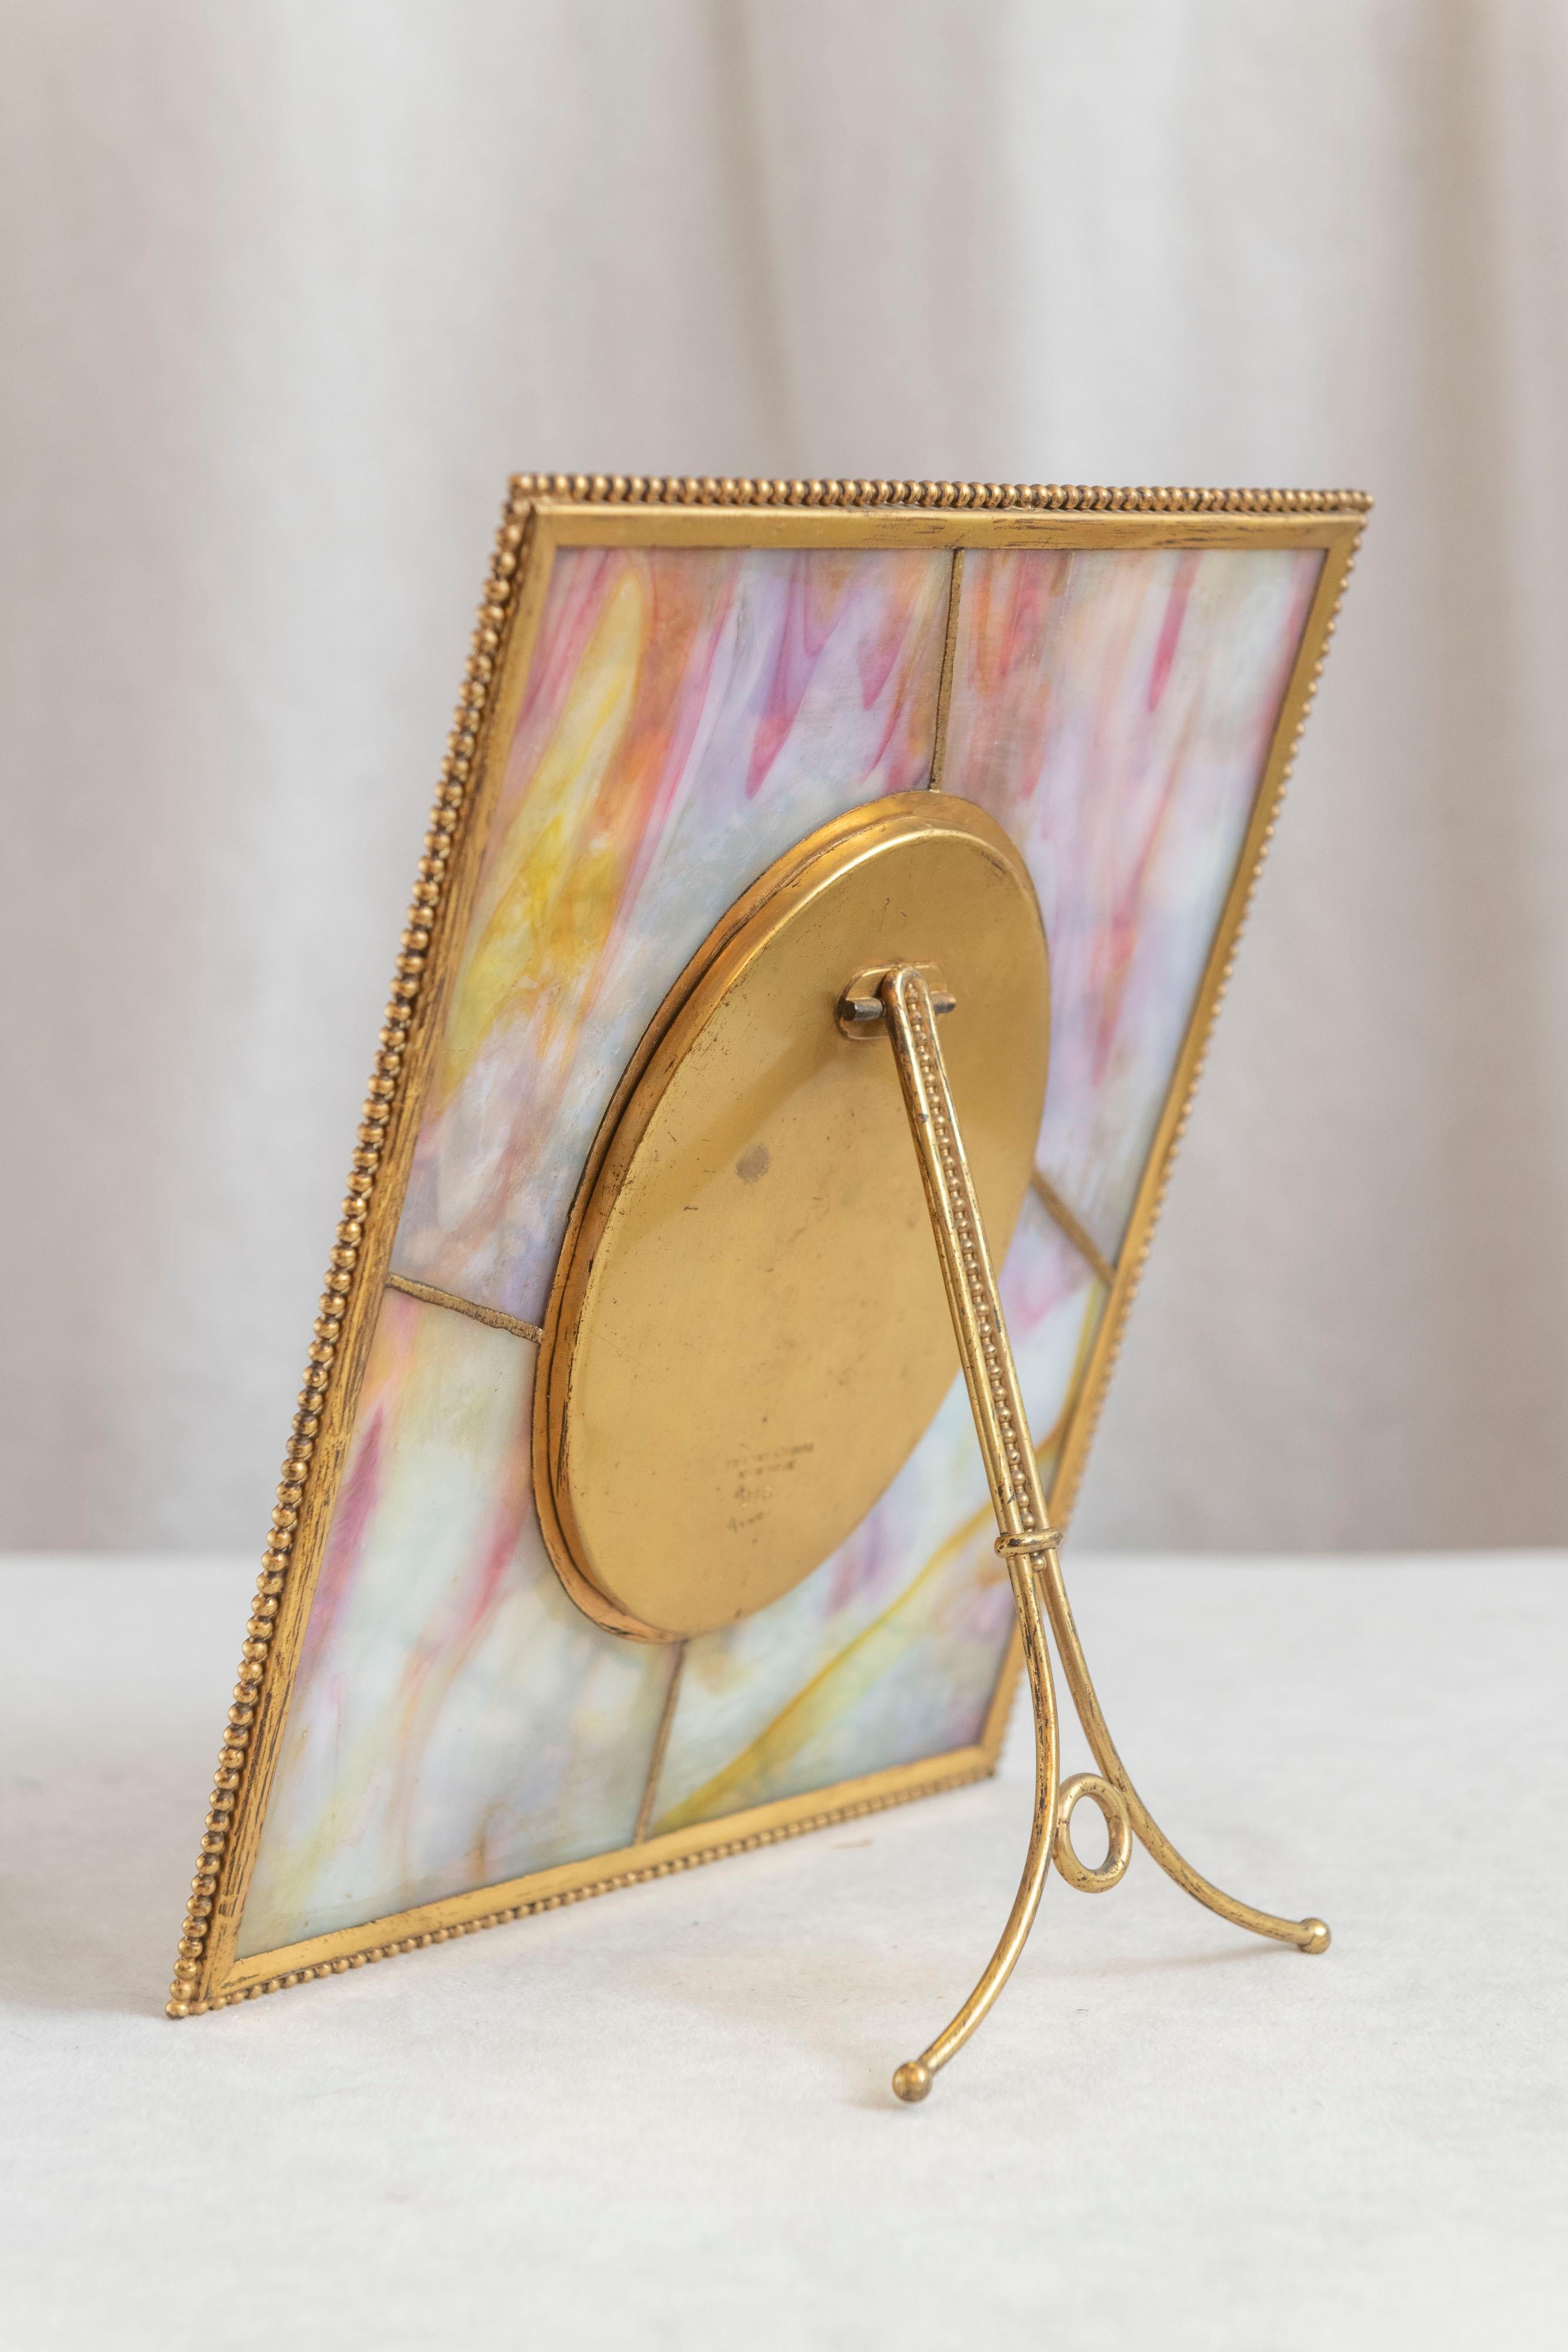 Early 20th Century Original Signed Tiffany Studios Picture Frame, Grapevine Pattern, ca. 1905